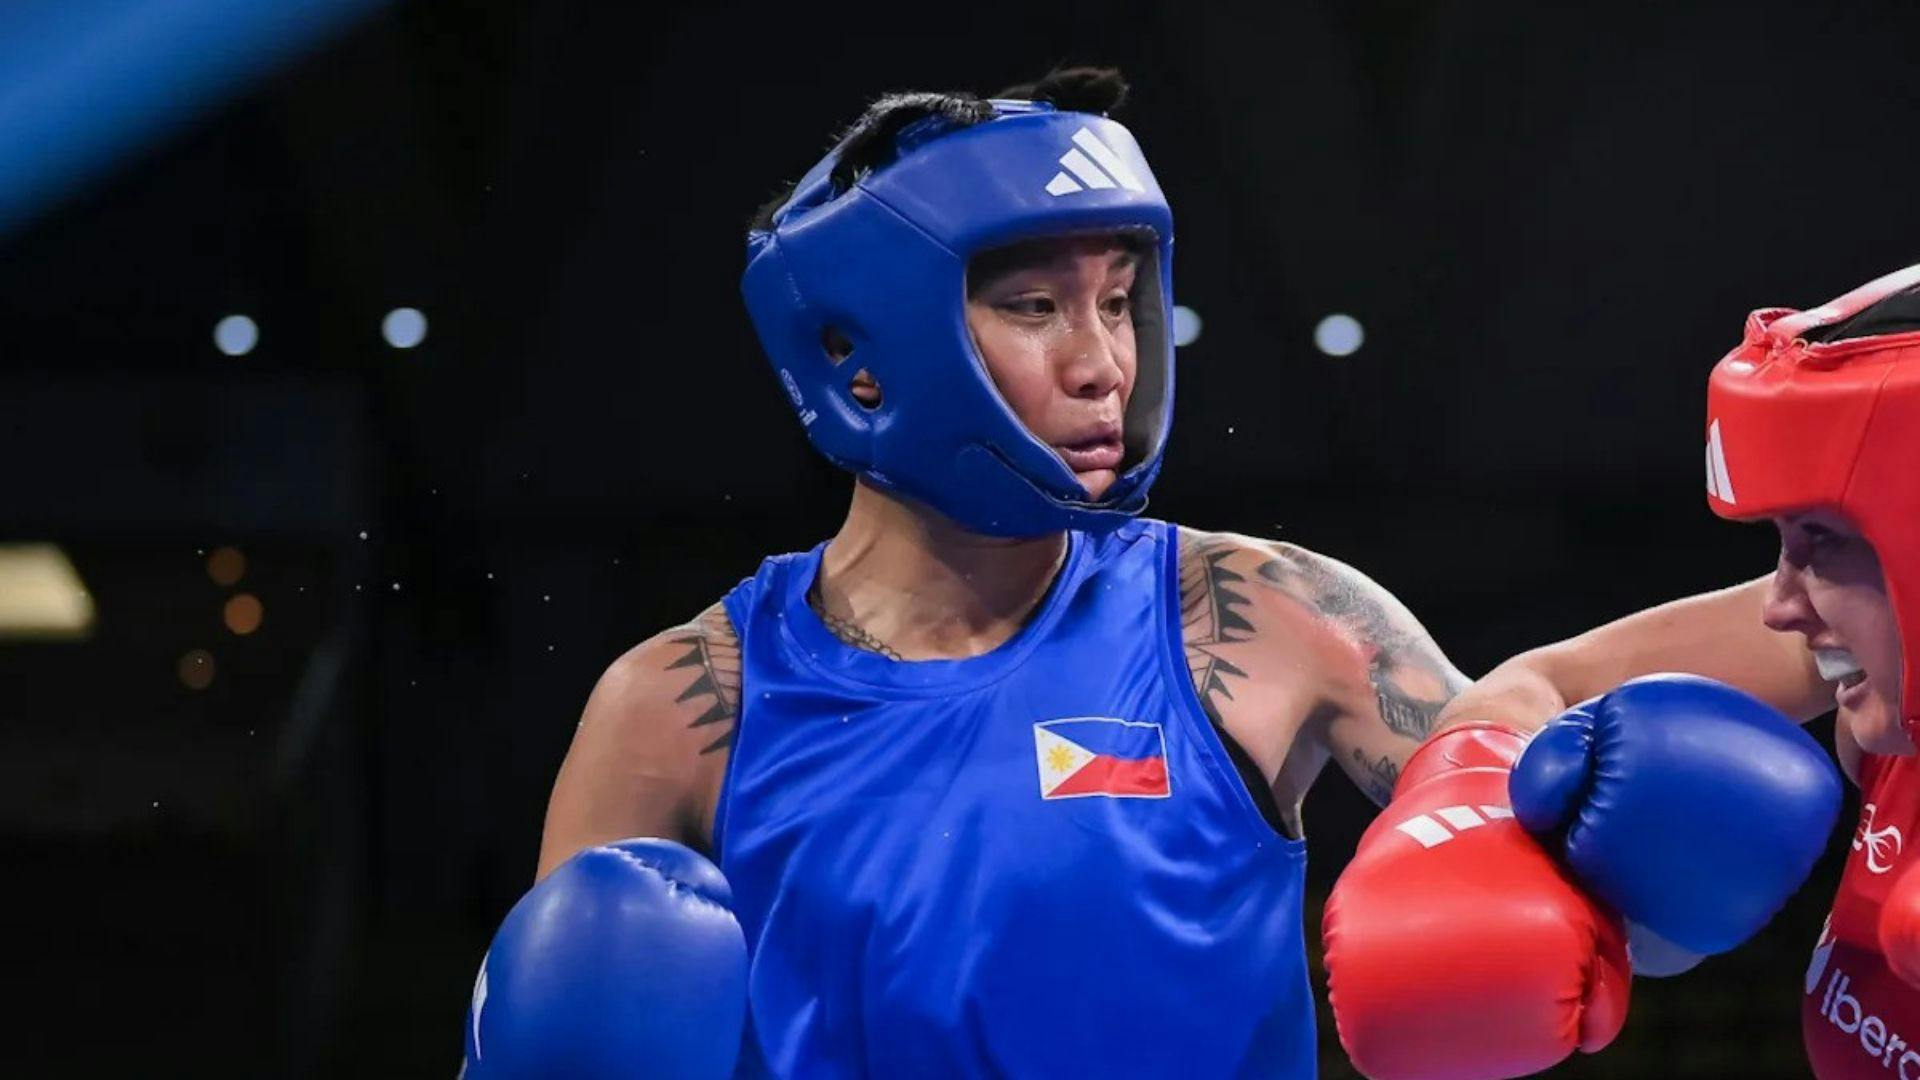 From Wushu to Boxing, Hergie Bacyadan vows to work even harder after Paris 2024 qualification